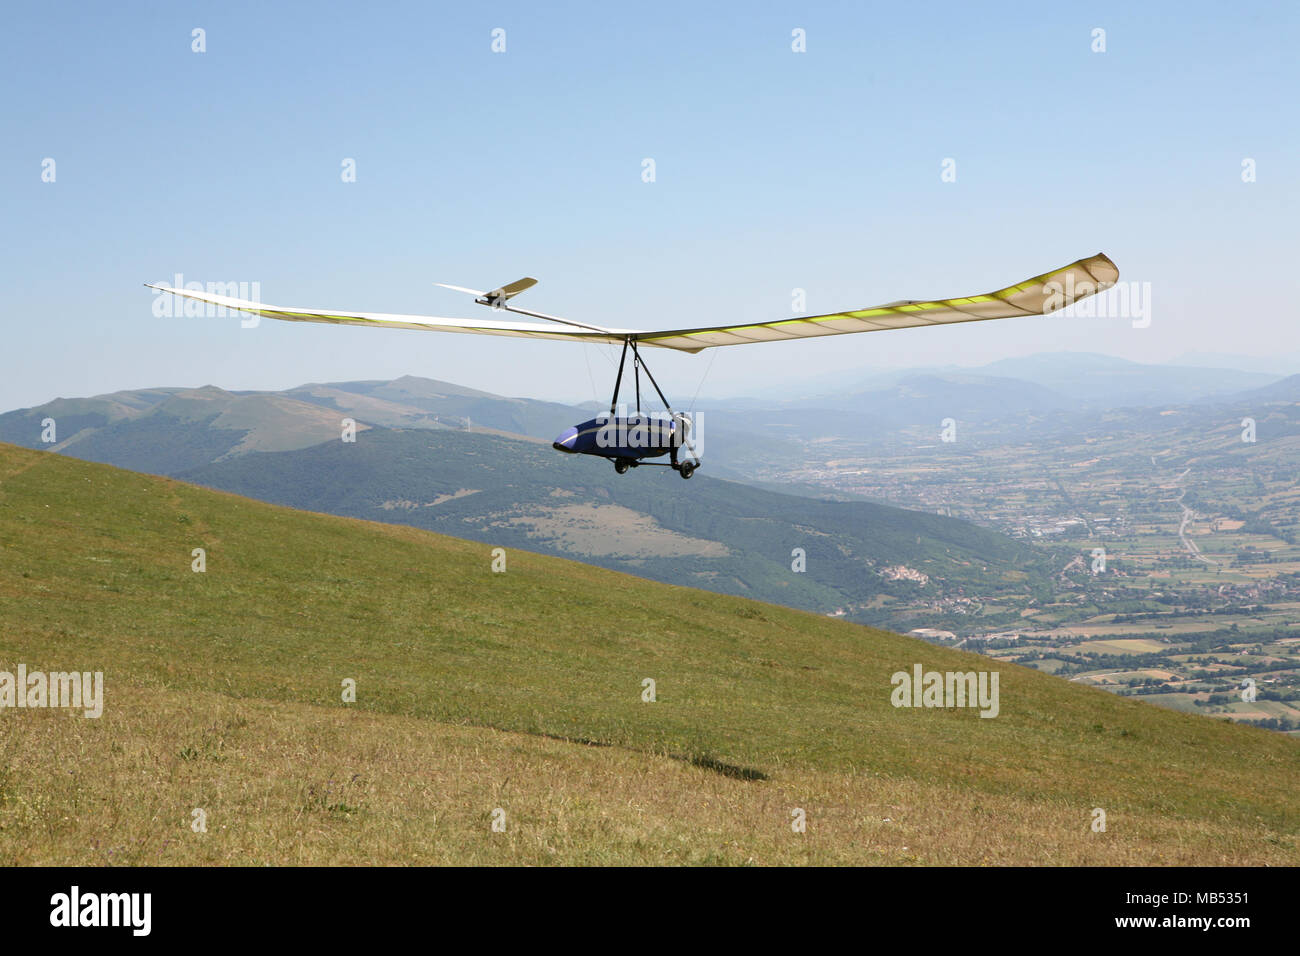 Hang glider taking off Stock Photo